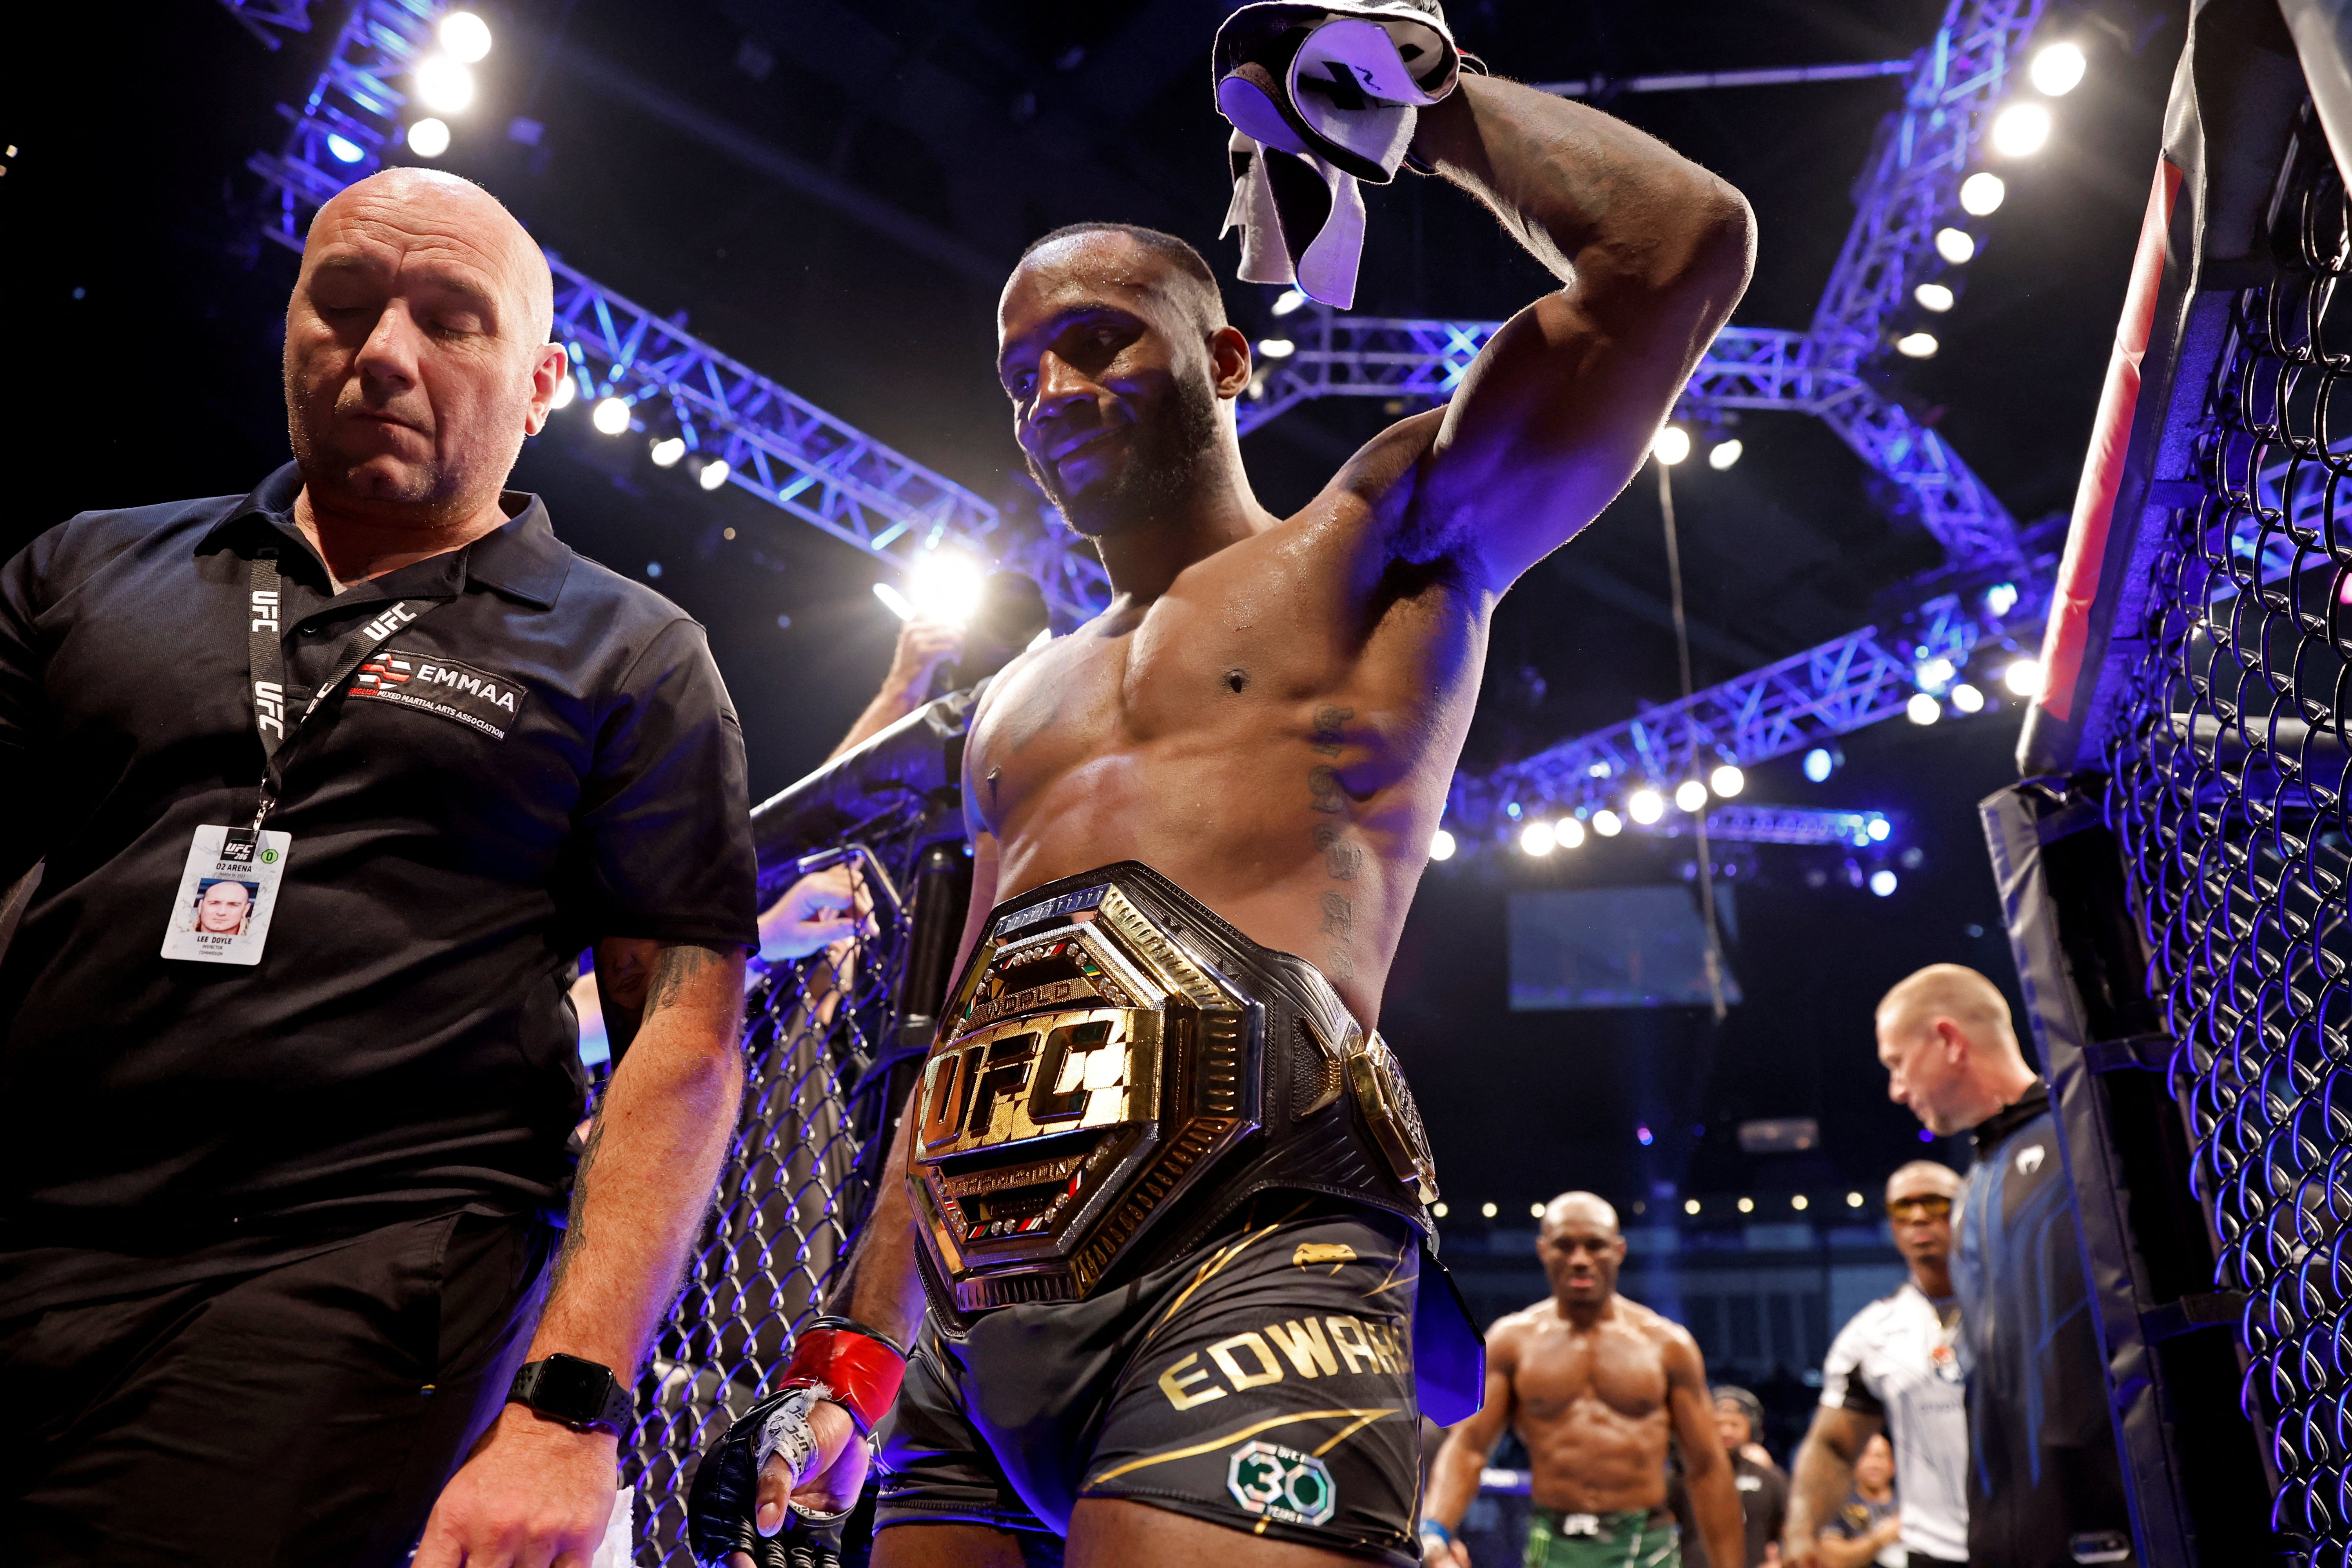 Leon Edwards after retaining the UFC welterweight title against Kamaru Usman in March